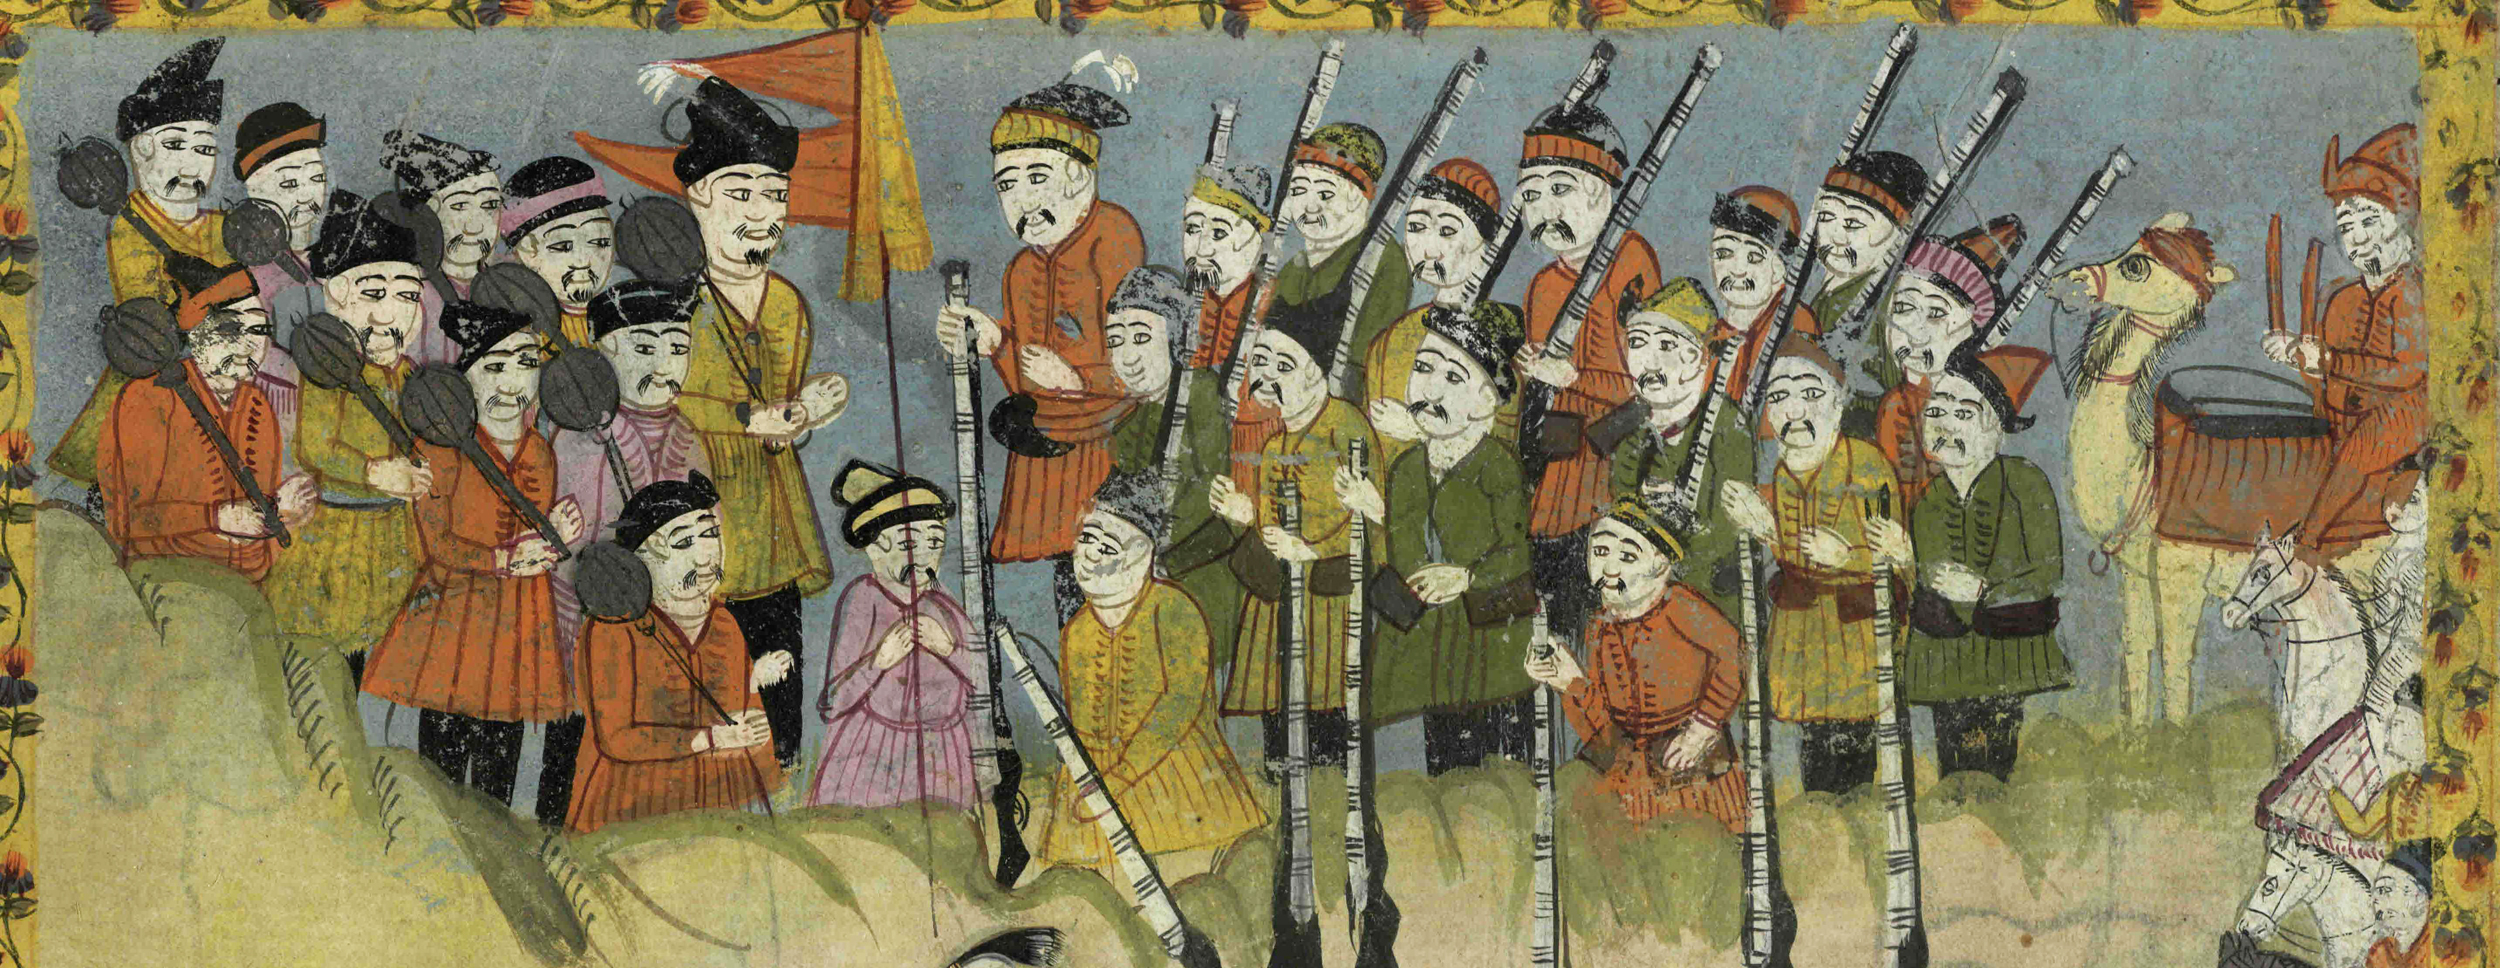 Men with guns and clubs from 17th or 18th century manuscript copy of “The Book of Wonders of the Age” (St Andrews ms32(o))